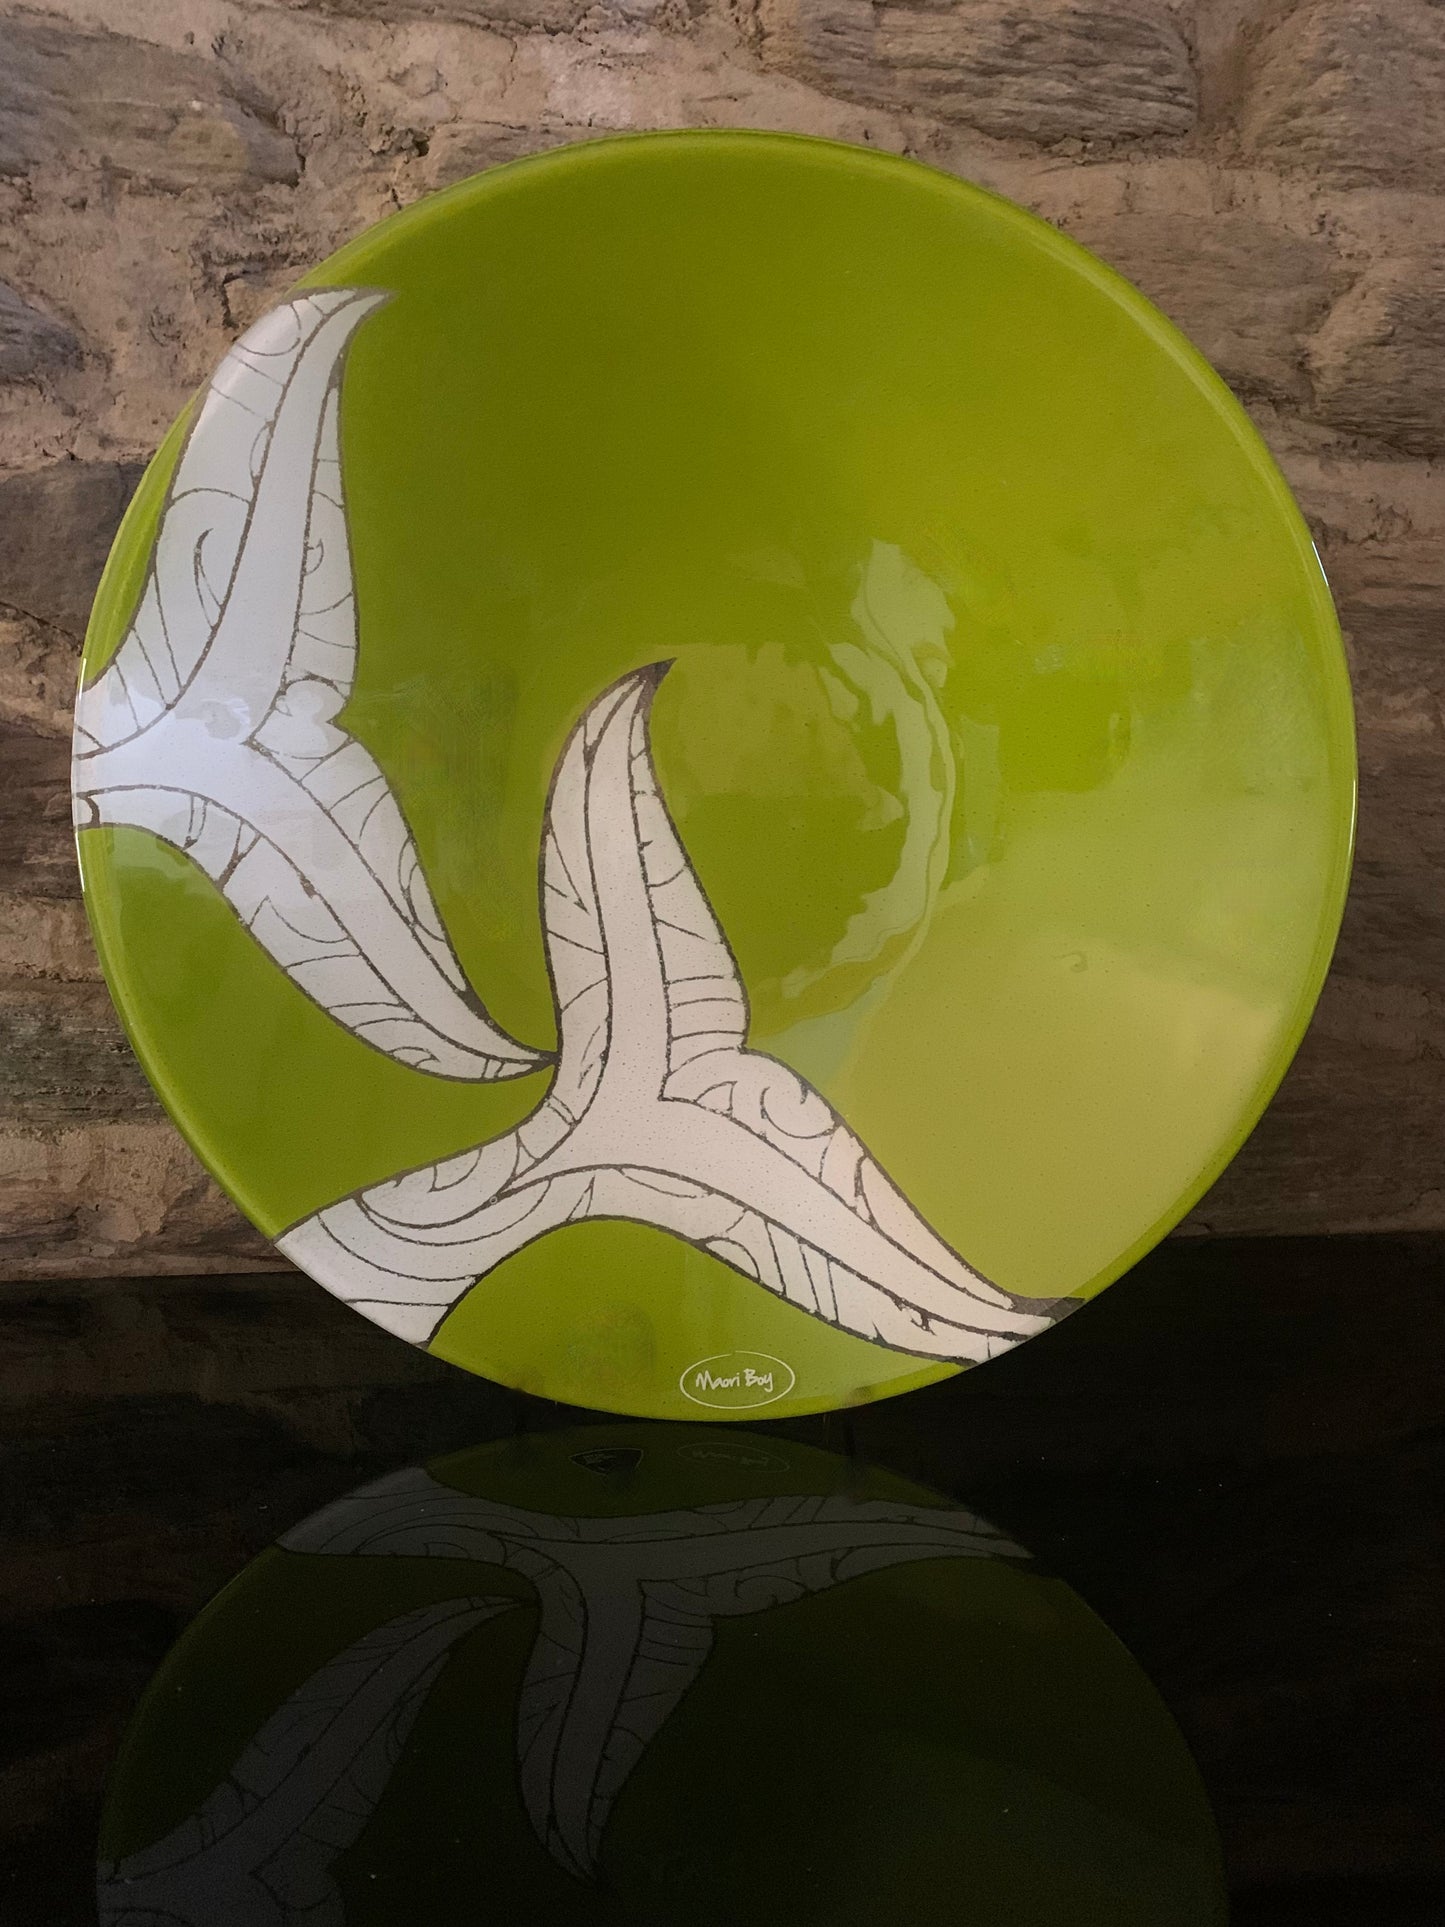 Fused Glass Bowl by Maori Boy - Whale Tail Design (lime green) 40cm